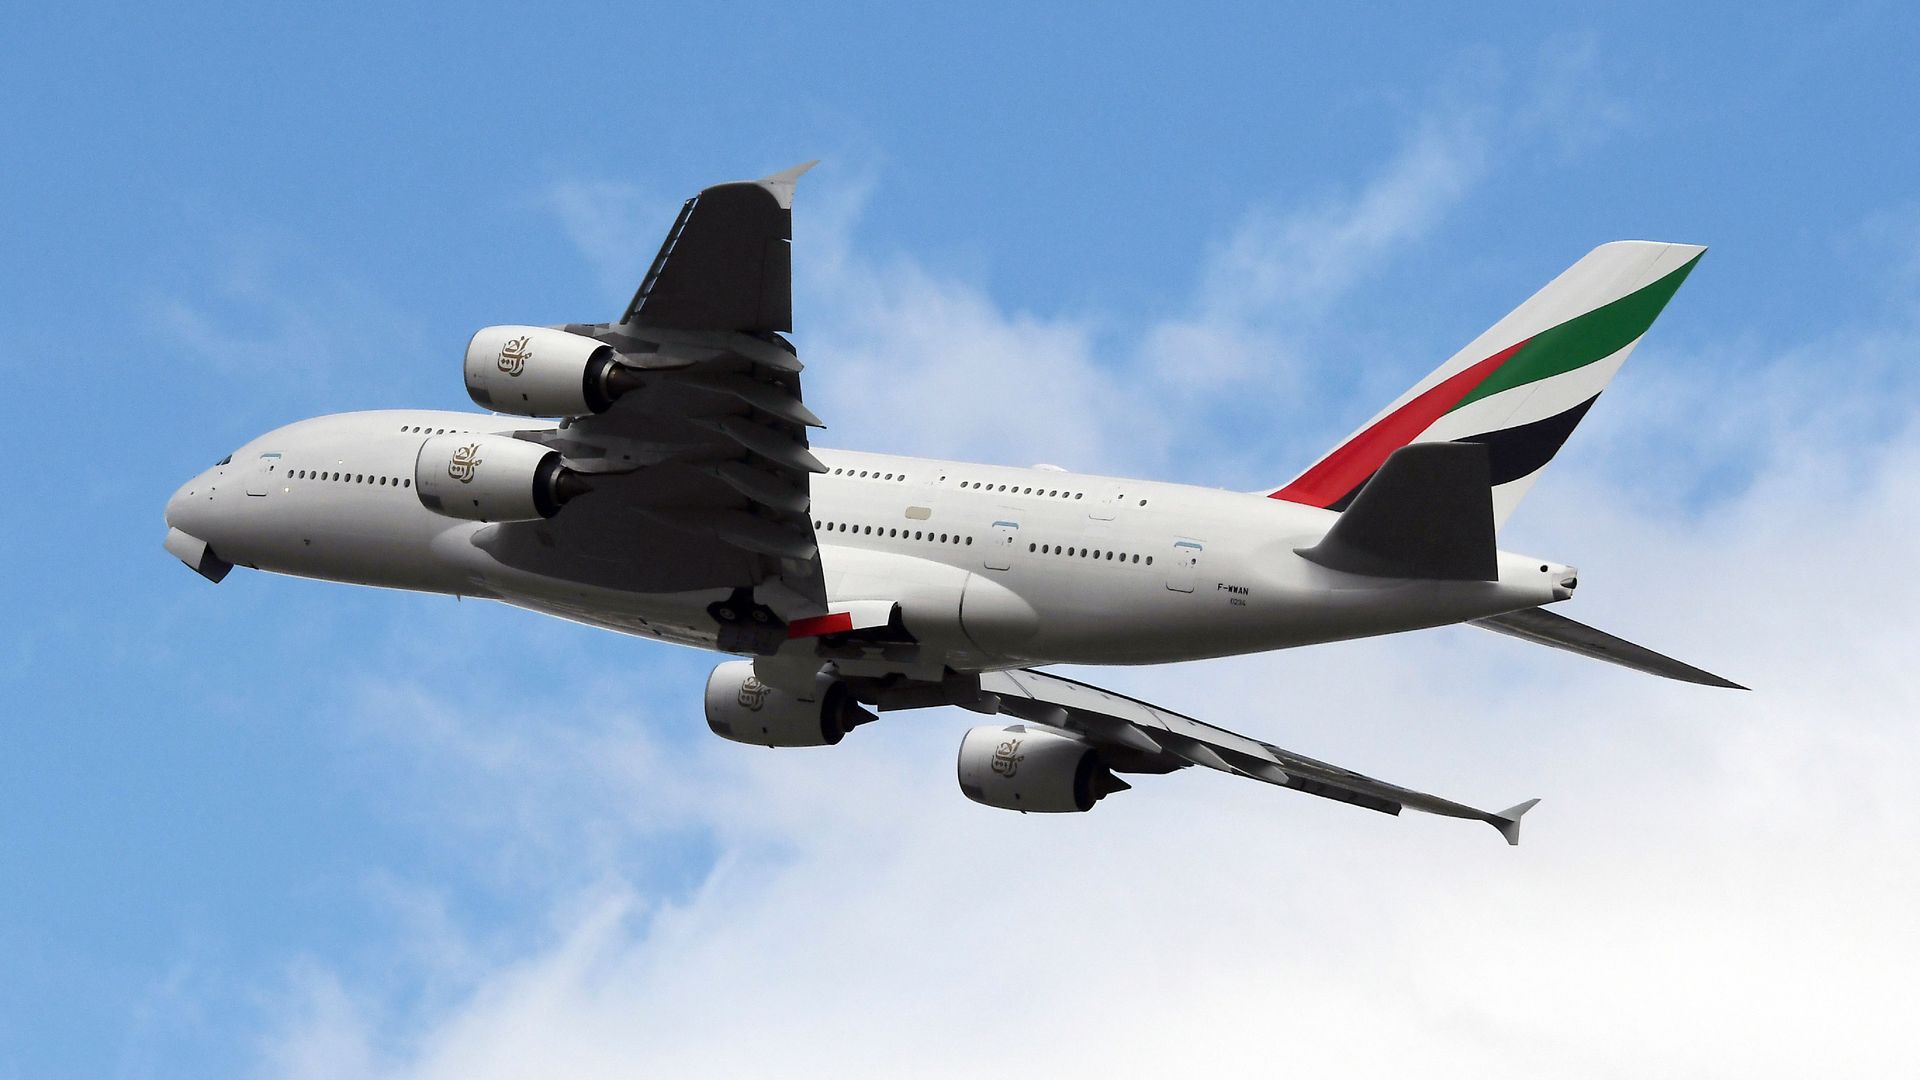 An Emirates Airbus A380 takes off